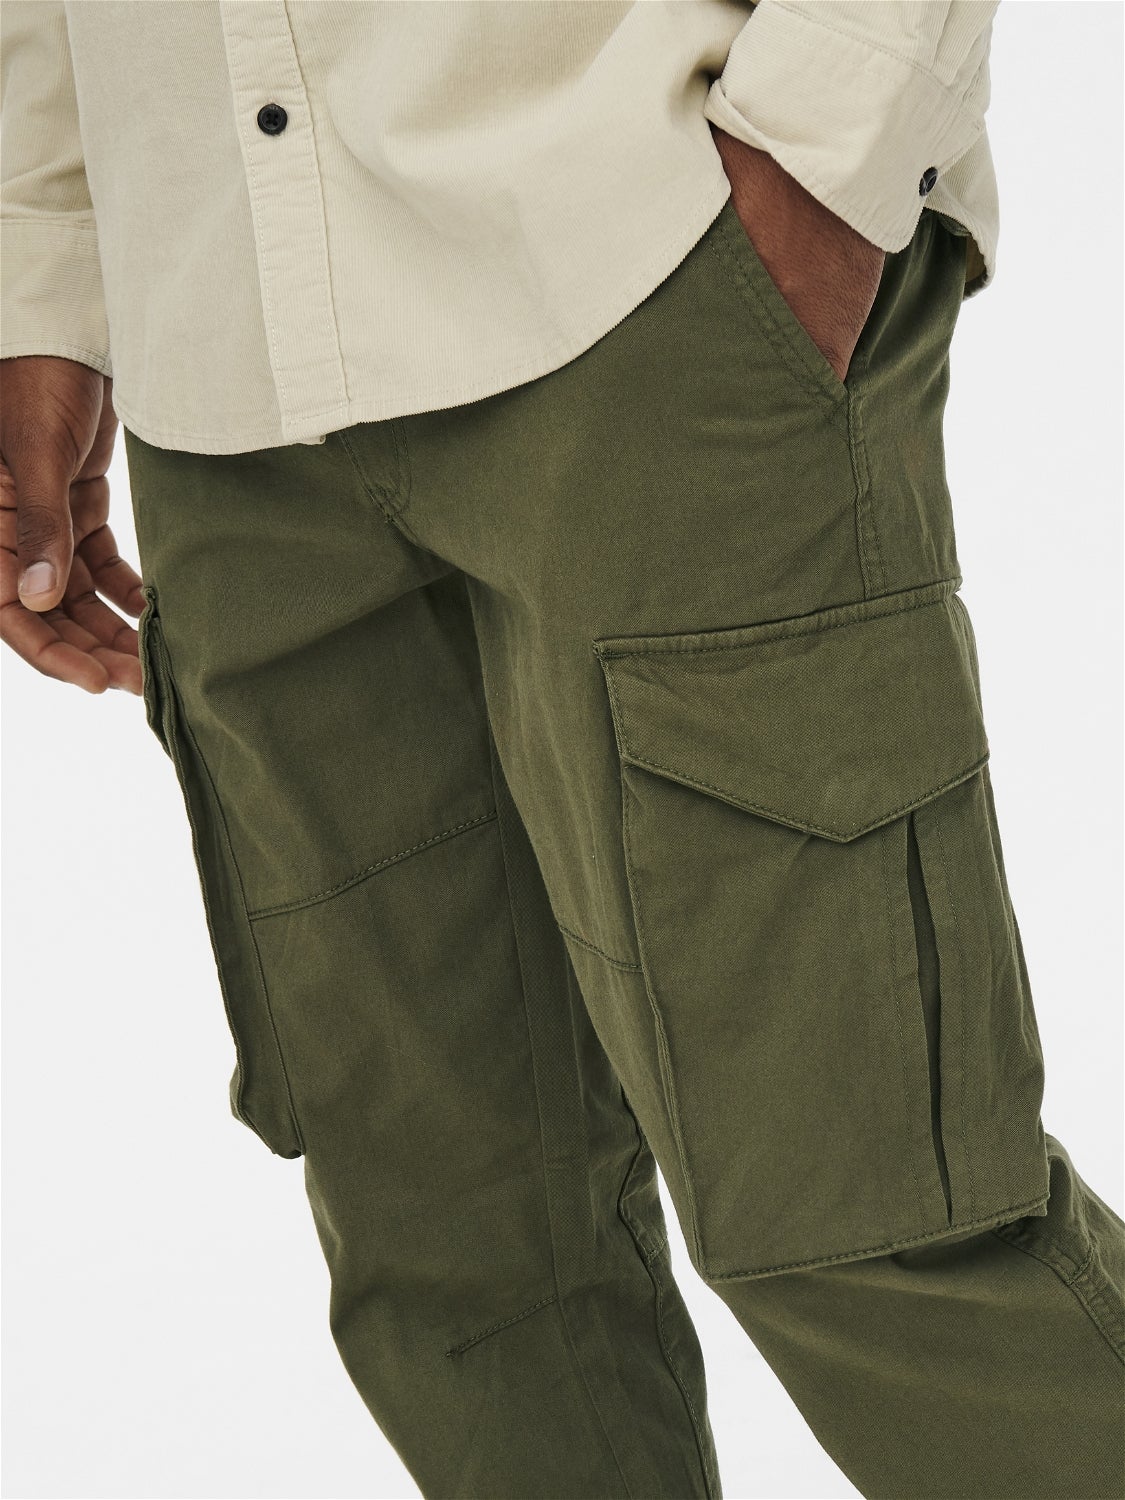 Loose Fit Tailored Trousers  Light Grey  ONLY  SONS